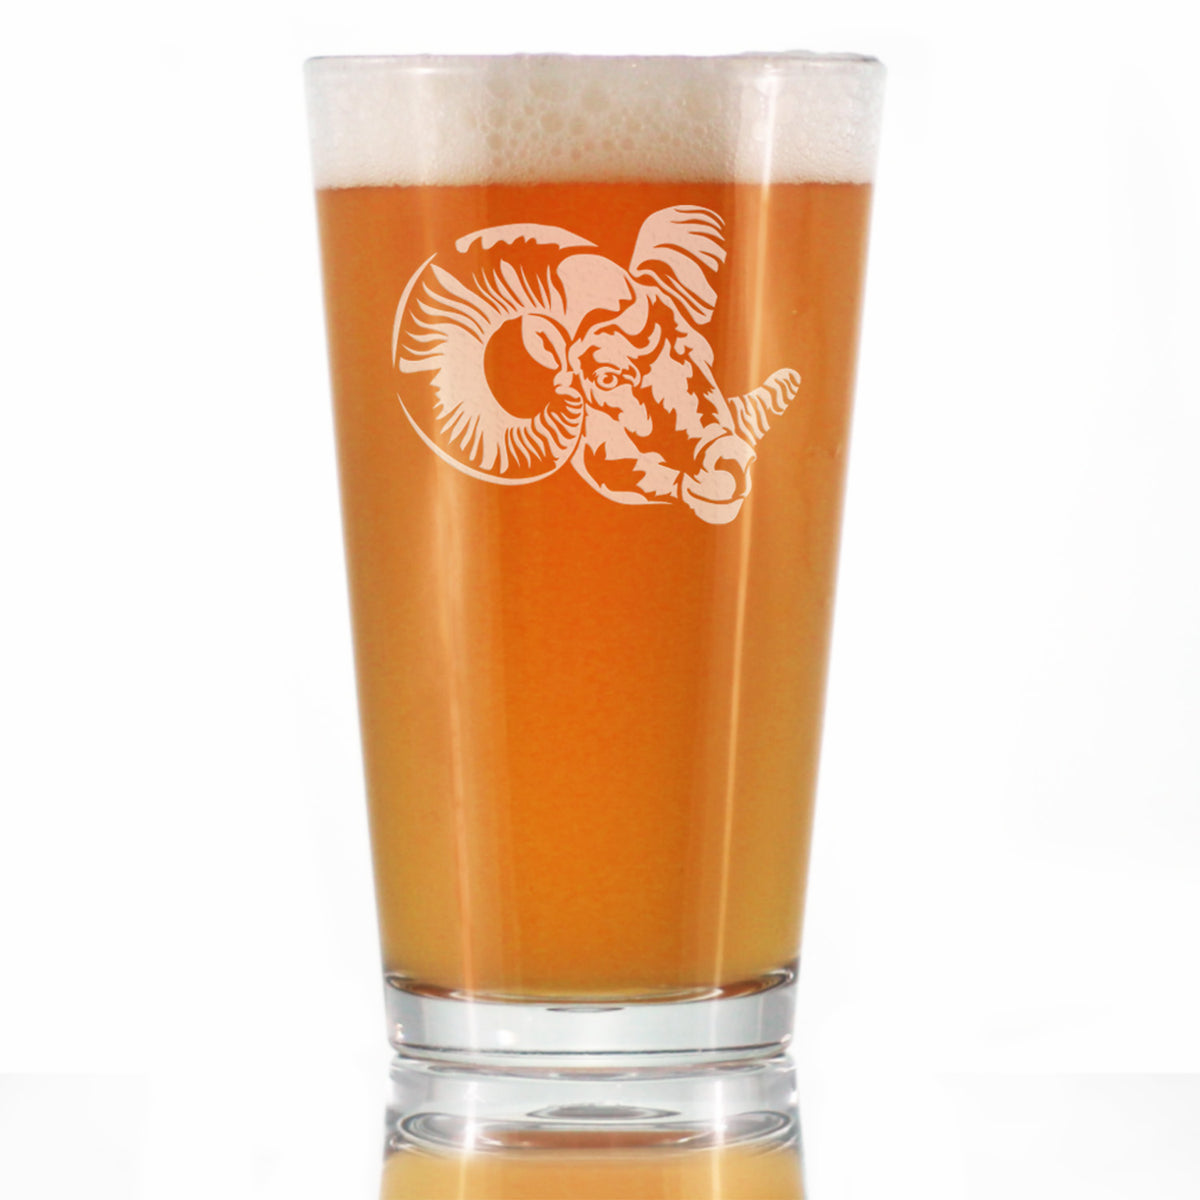 Ram Face Pint Glass for Beer - Bighorn Sheep Themed Decor and Gifts for Rocky Mountain Animal Lovers - 16 Oz Glasses